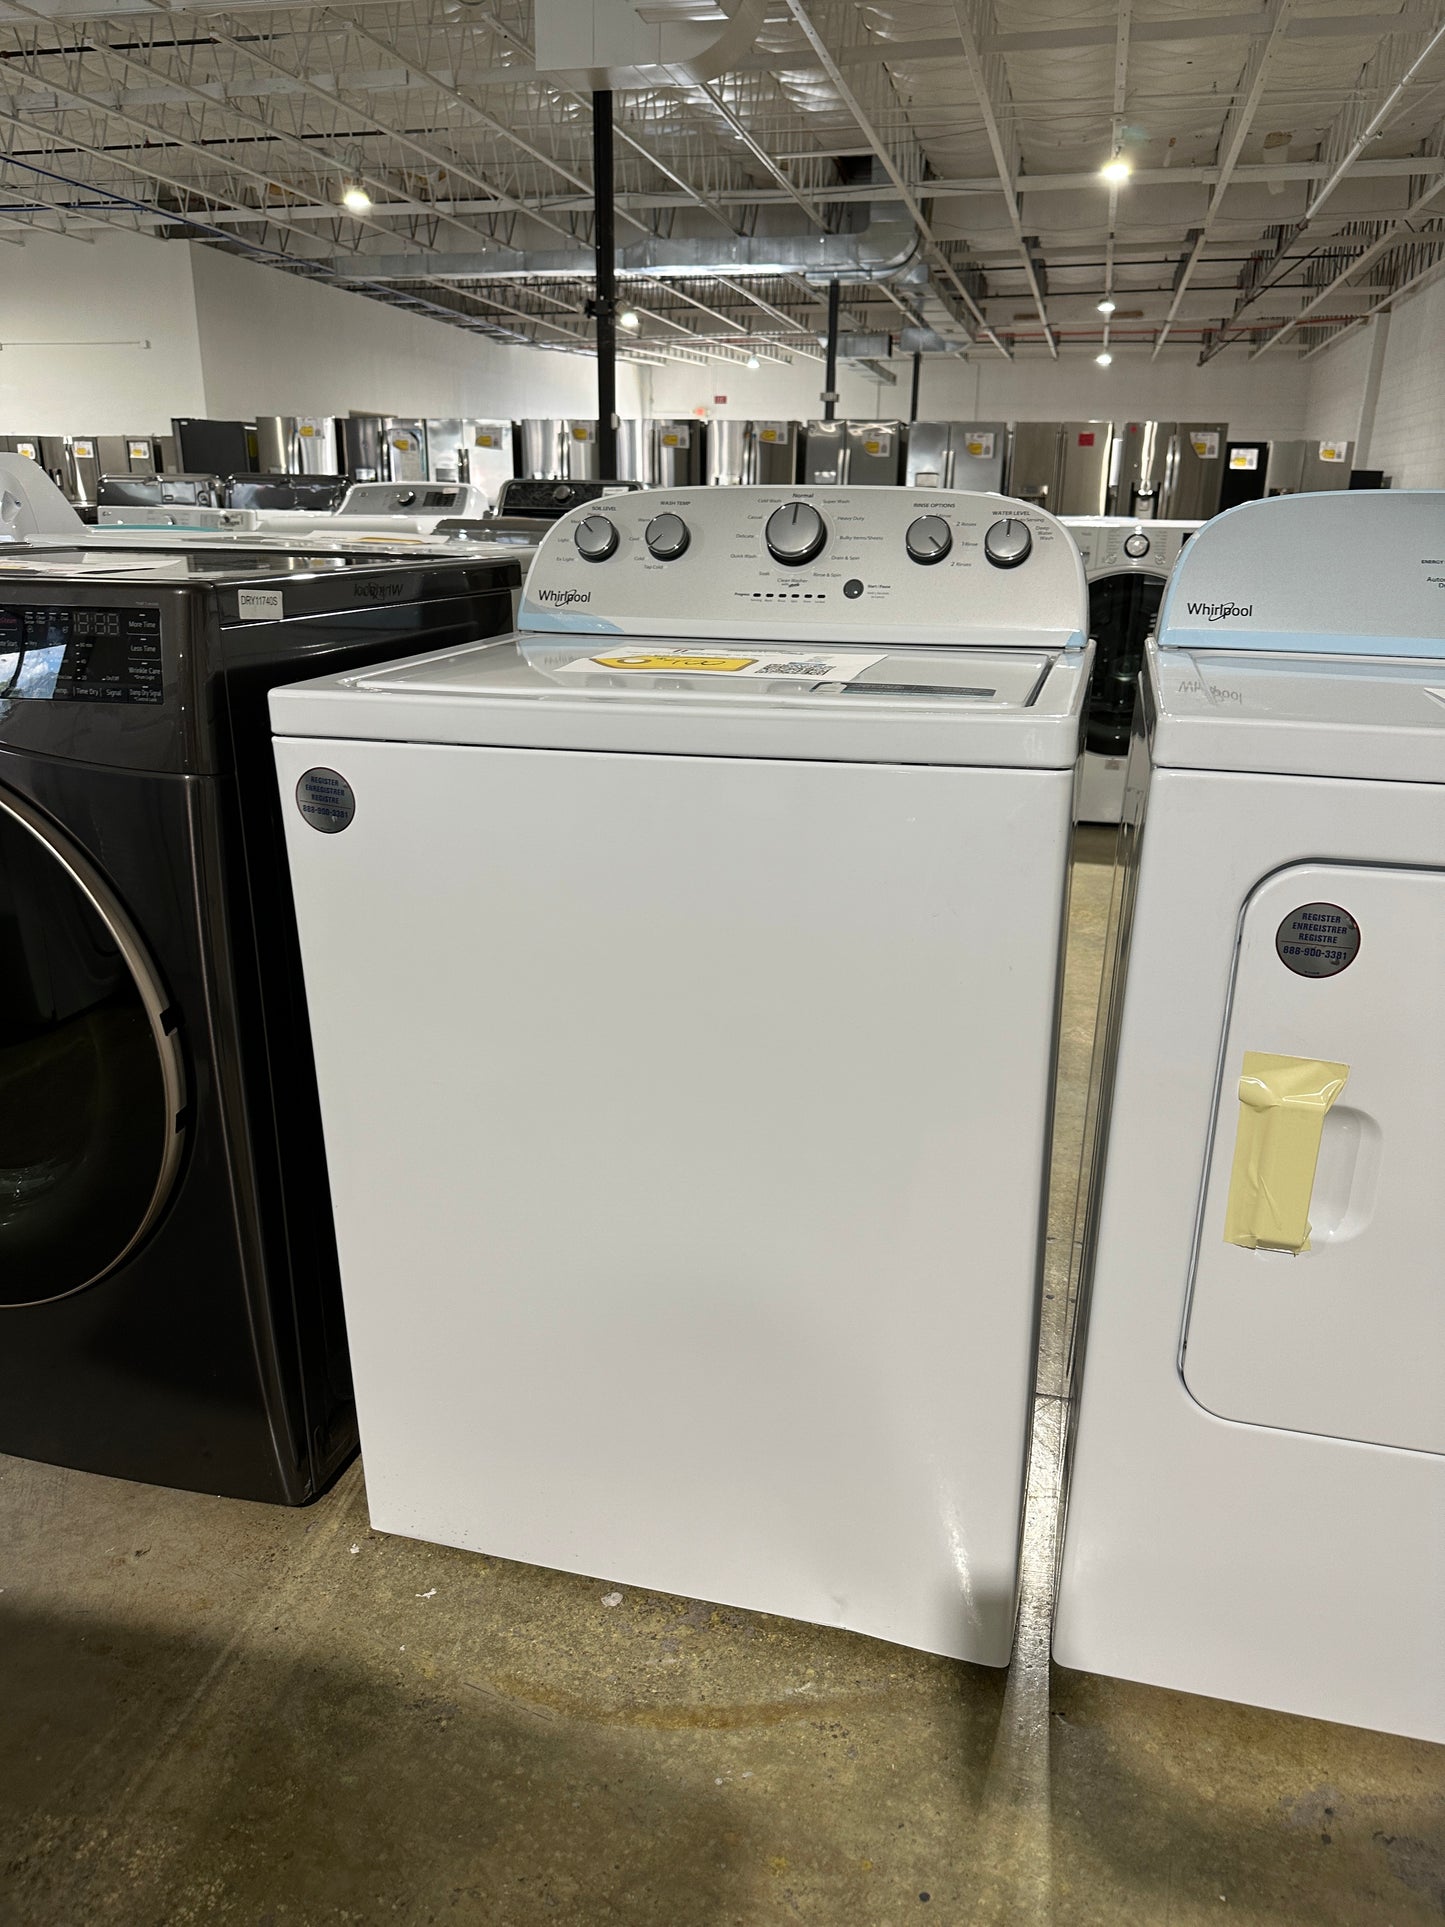 Whirlpool - 3.5 Cu. Ft. 12-Cycle Top-Loading Washer - White  Model:WTW4816FW  WAS11903S